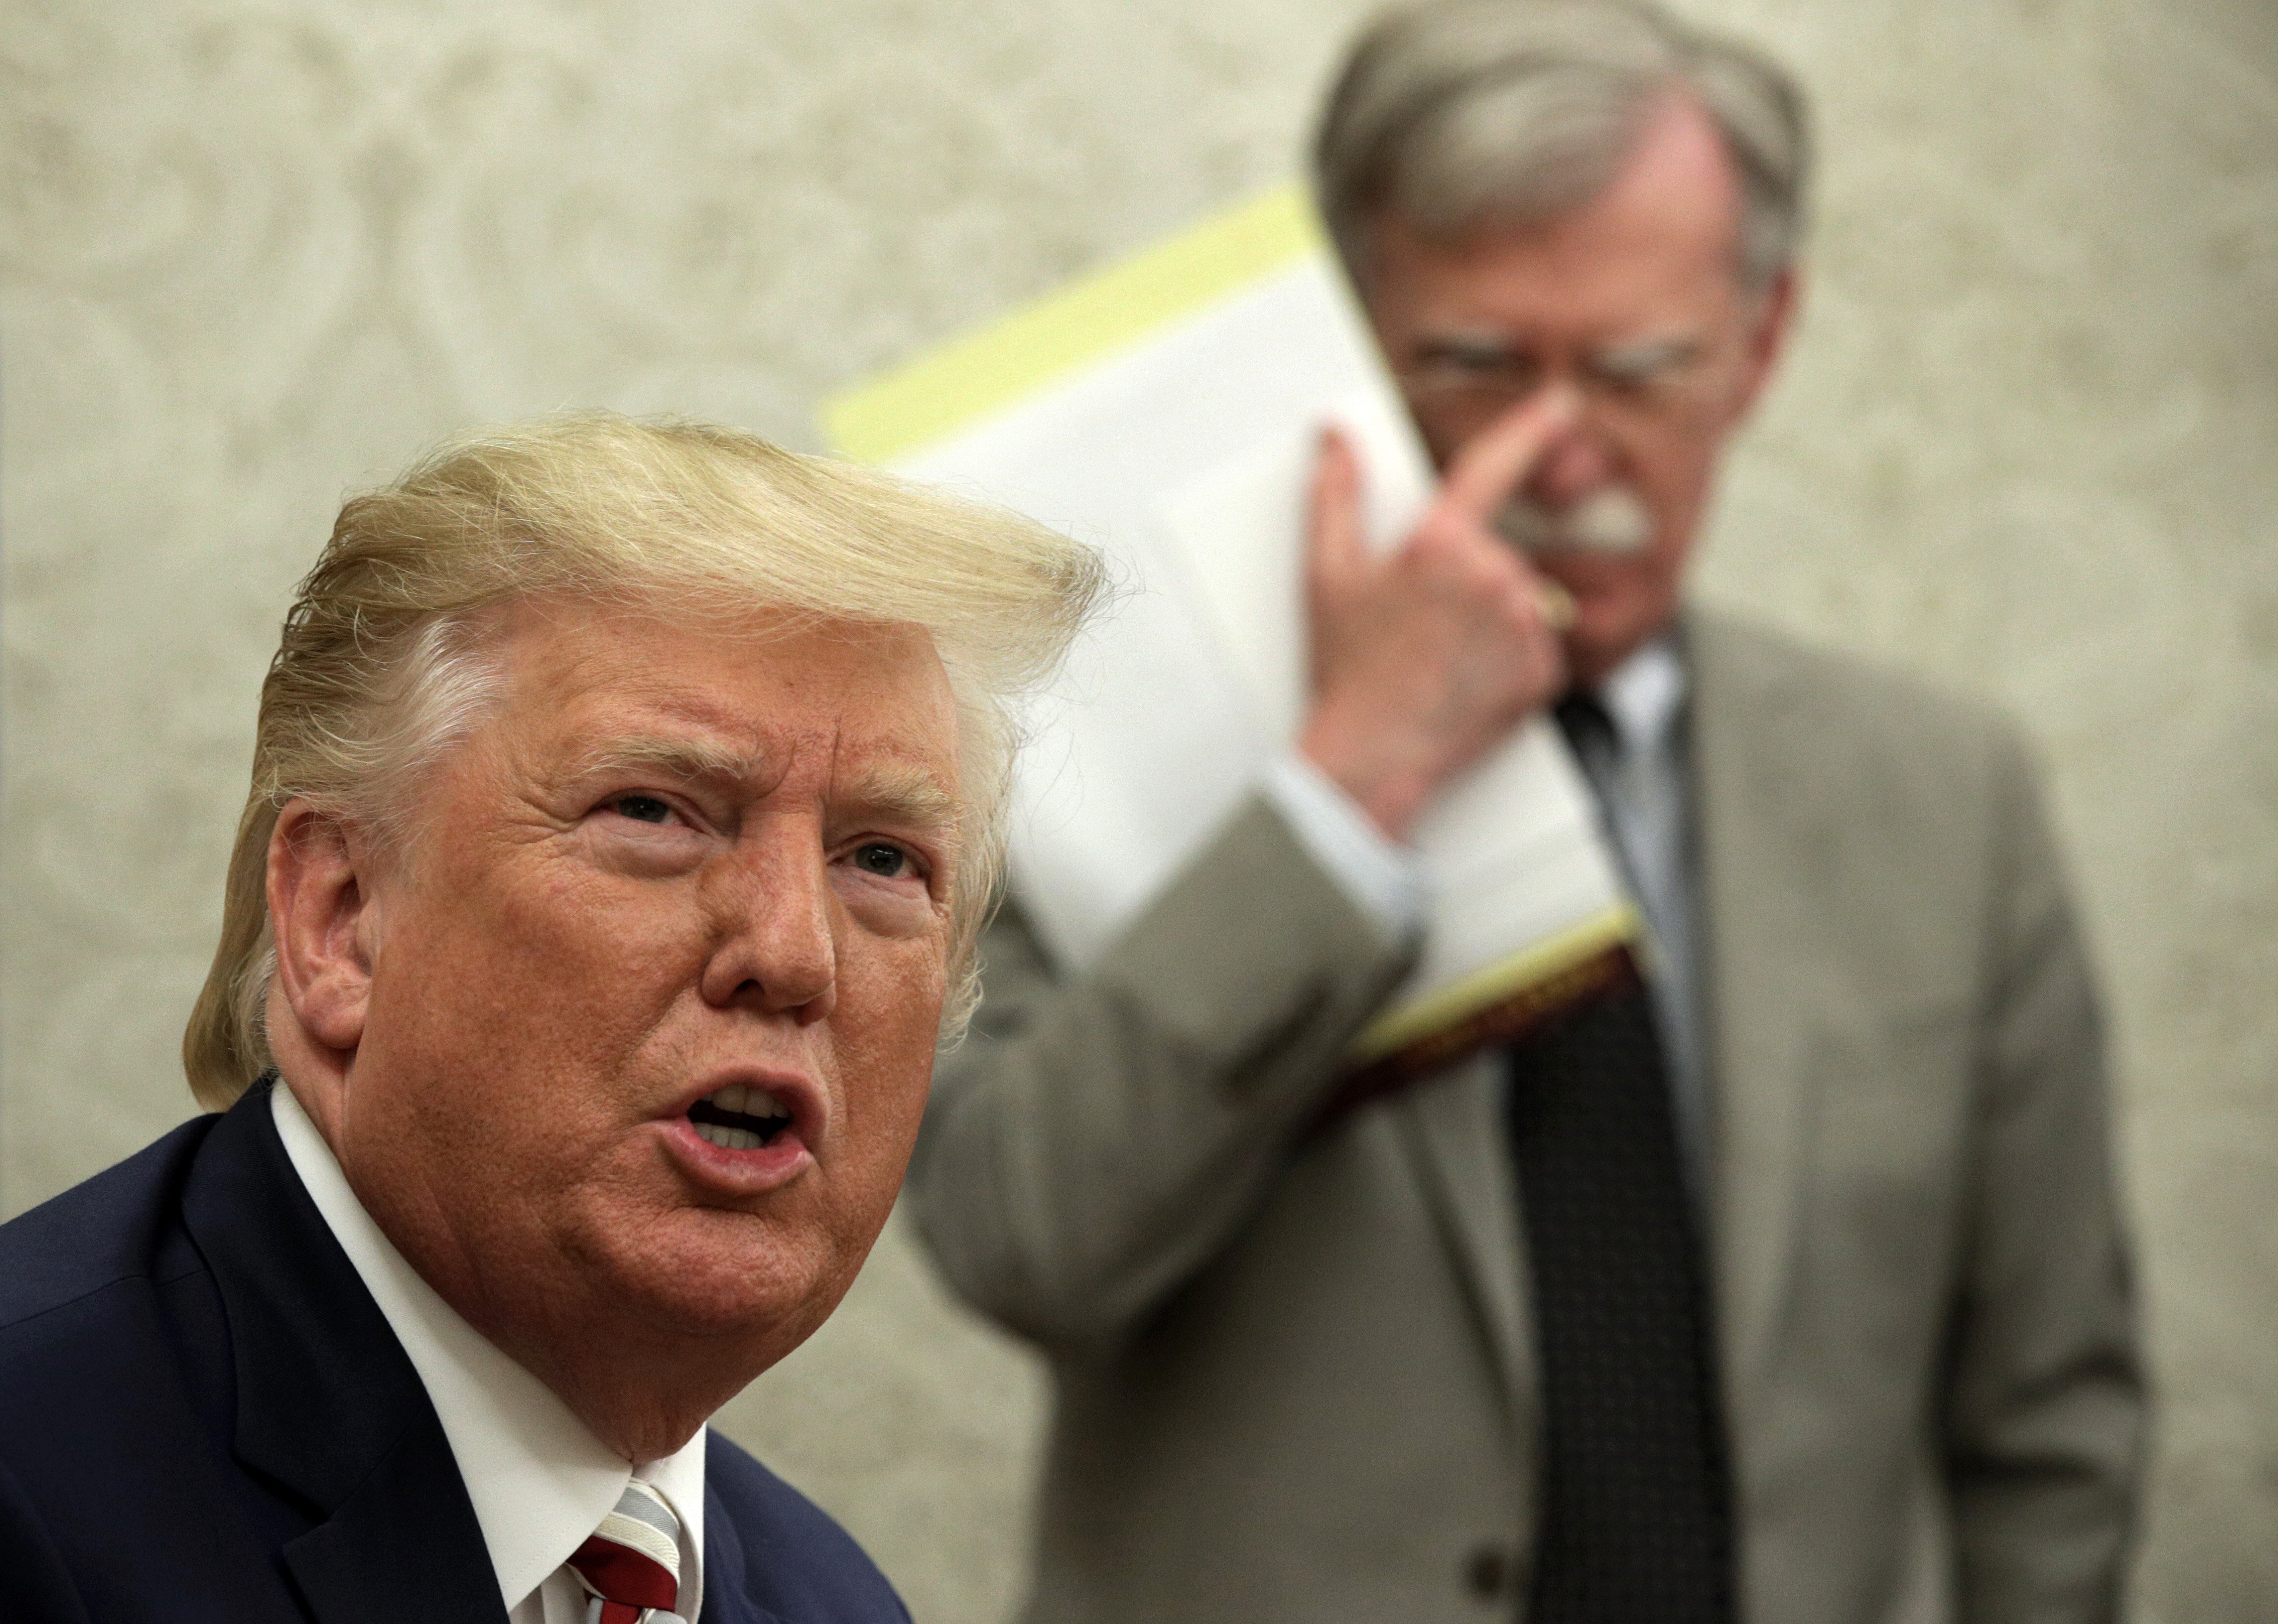 WASHINGTON, DC - AUGUST 20: U.S. President Donald Trump speaks to members of the media as National Security Adviser John Bolton listens during a meeting with President of Romania Klaus Iohannis in the Oval Office of the White House August 20, 2019 in Washington, DC. This is Iohannis’ second visit to the Trump White House and the two leaders are expected to discuss bilateral issues during their meeting. (Photo by Alex Wong/Getty Images)